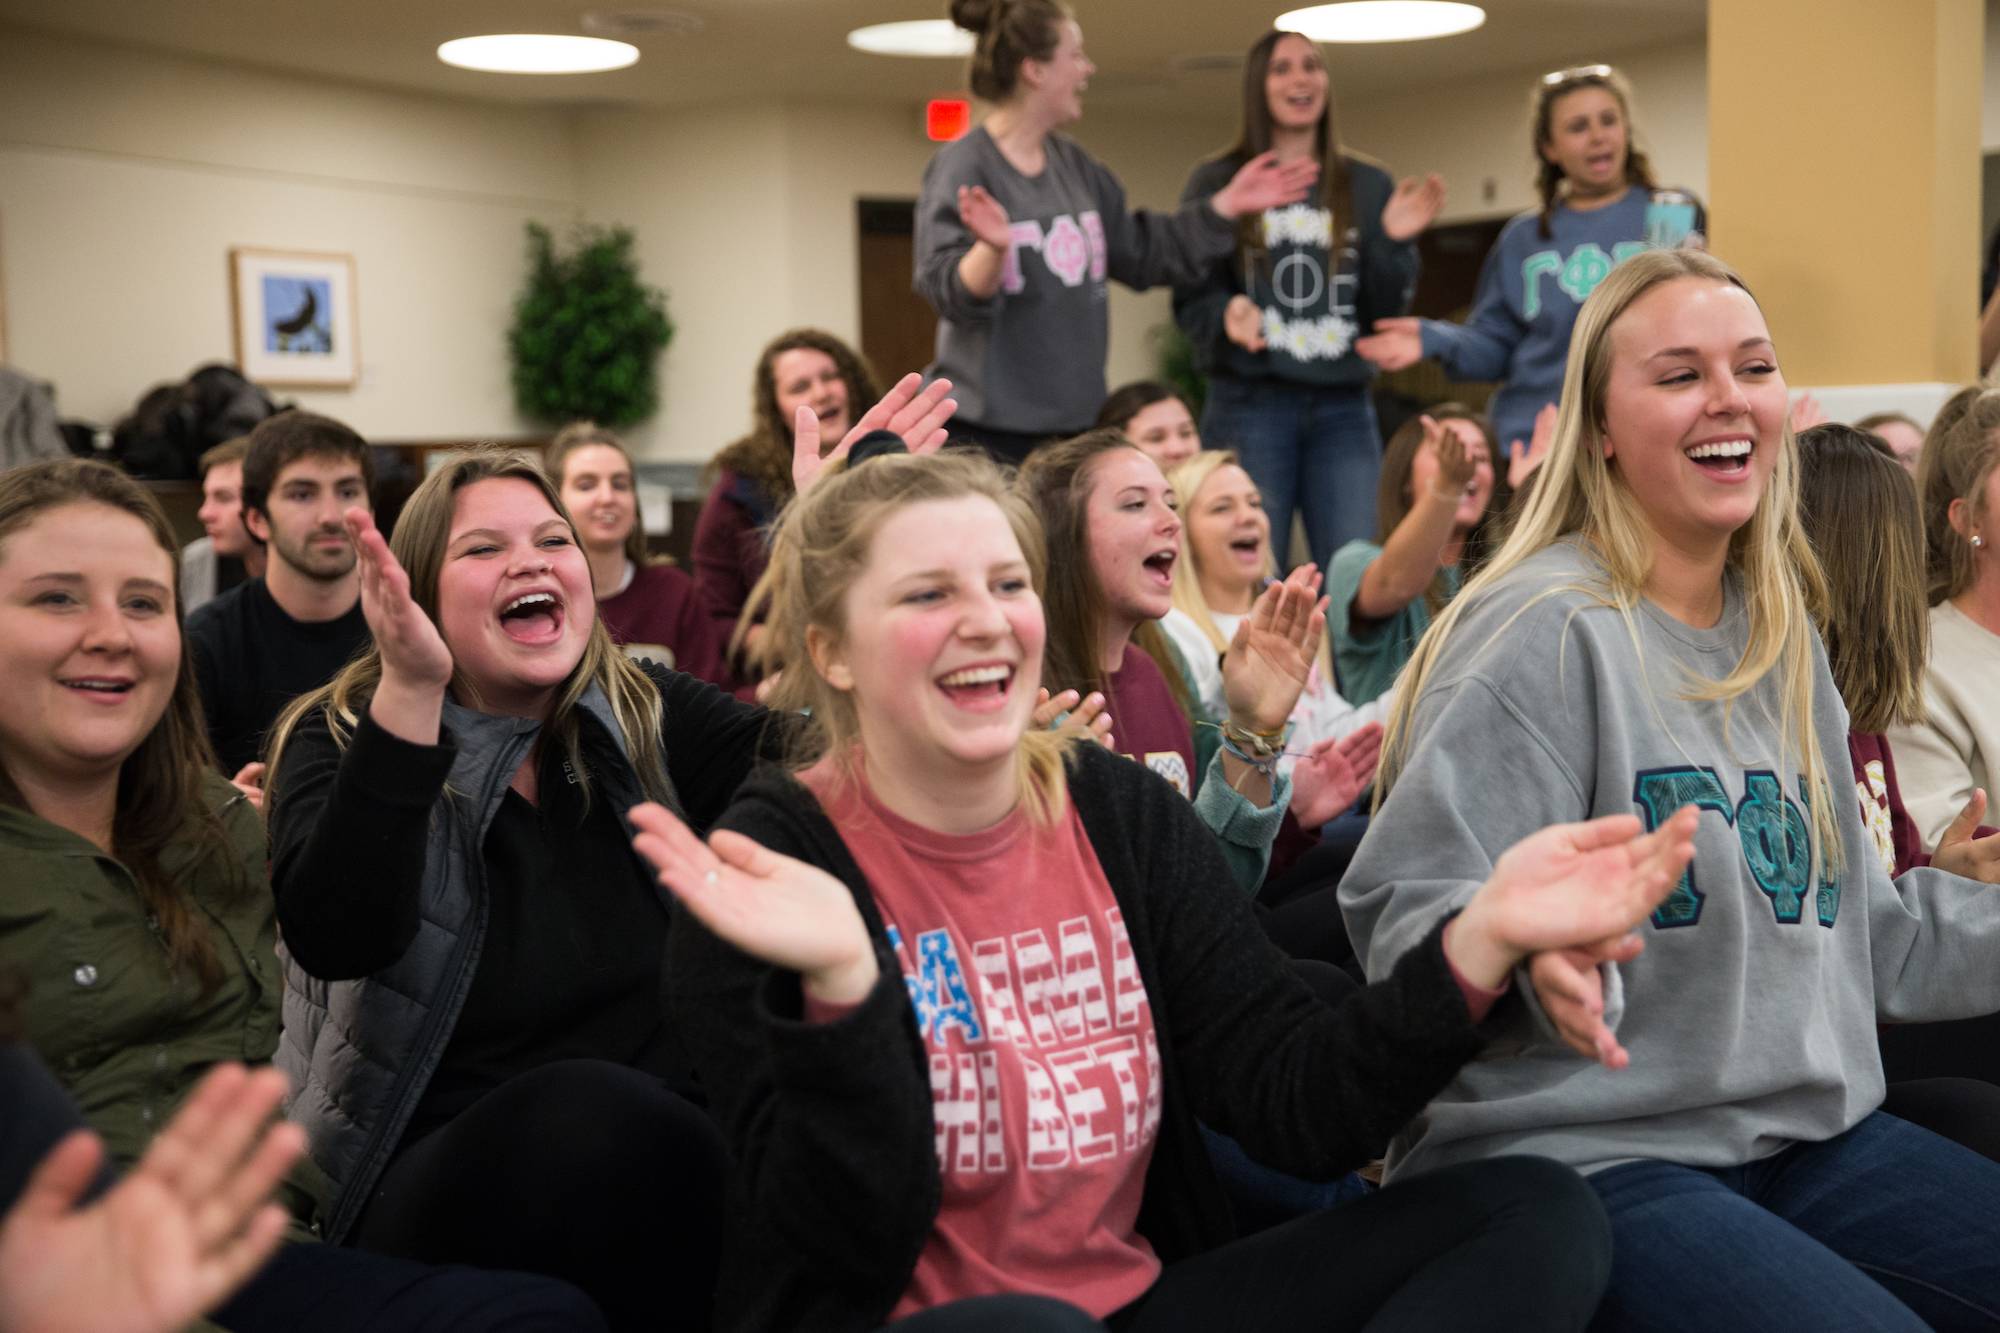 A group of greek life students laughing and clapping